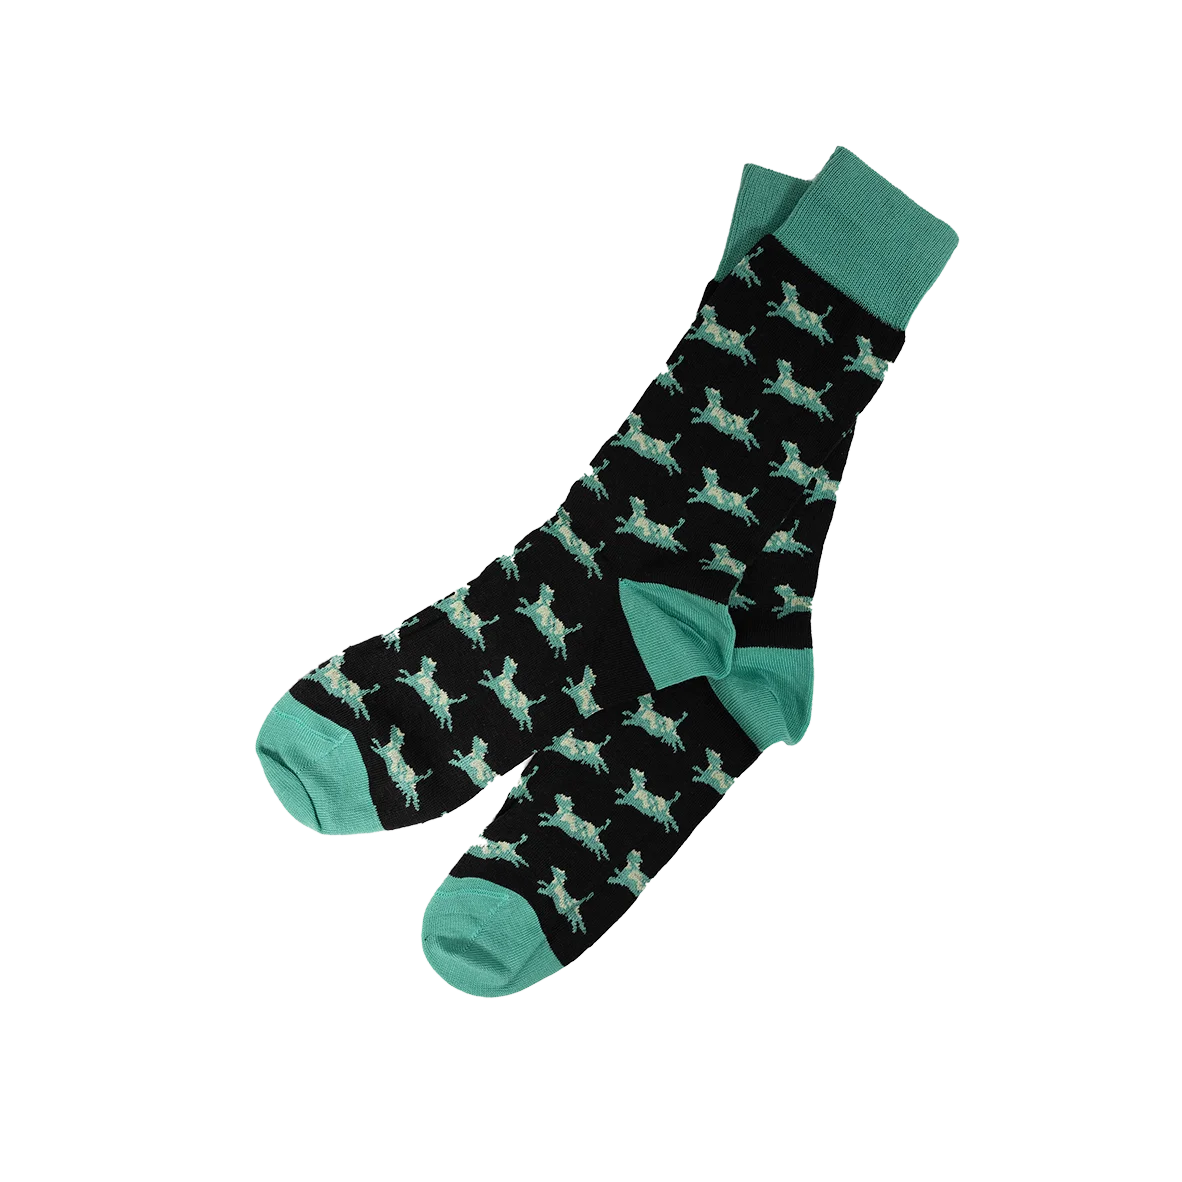 Visit the Leaping Cow Socks Product Page